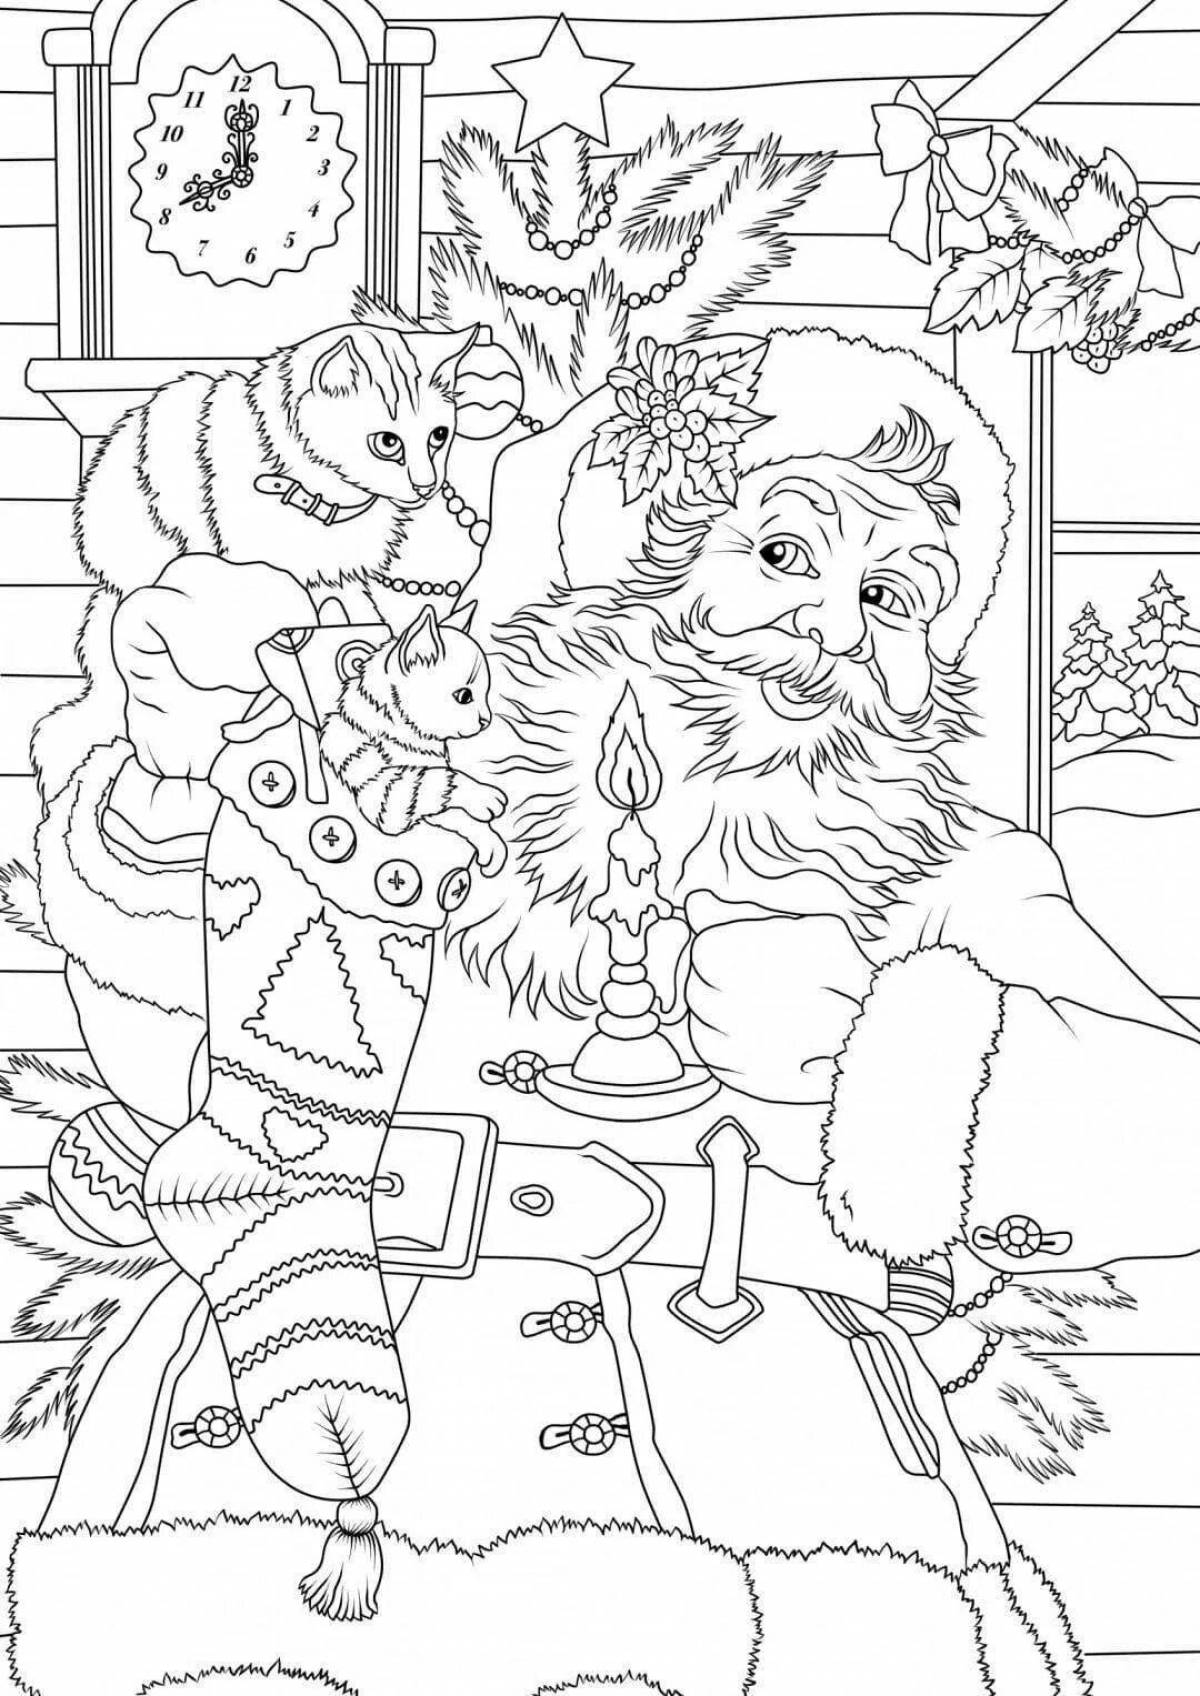 Color-frenzy cat new year coloring page